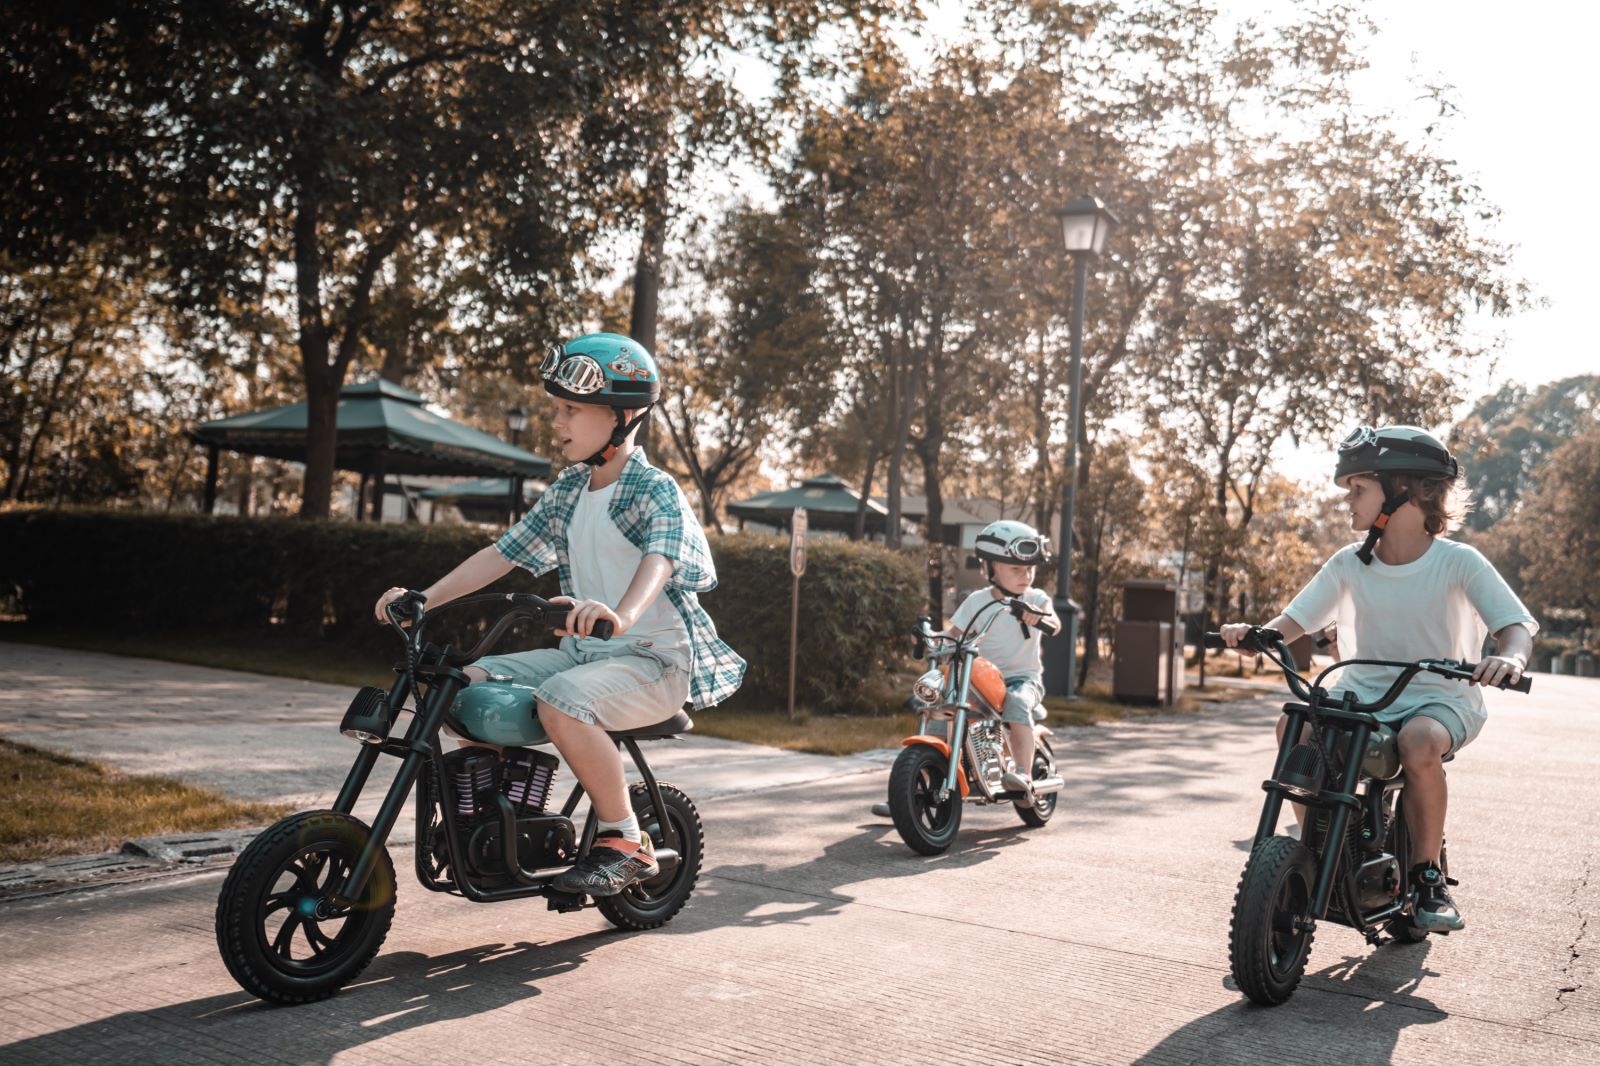 Ready to enjoy the fun of riding? Come try the HYPER GOGO electric motorcycle!